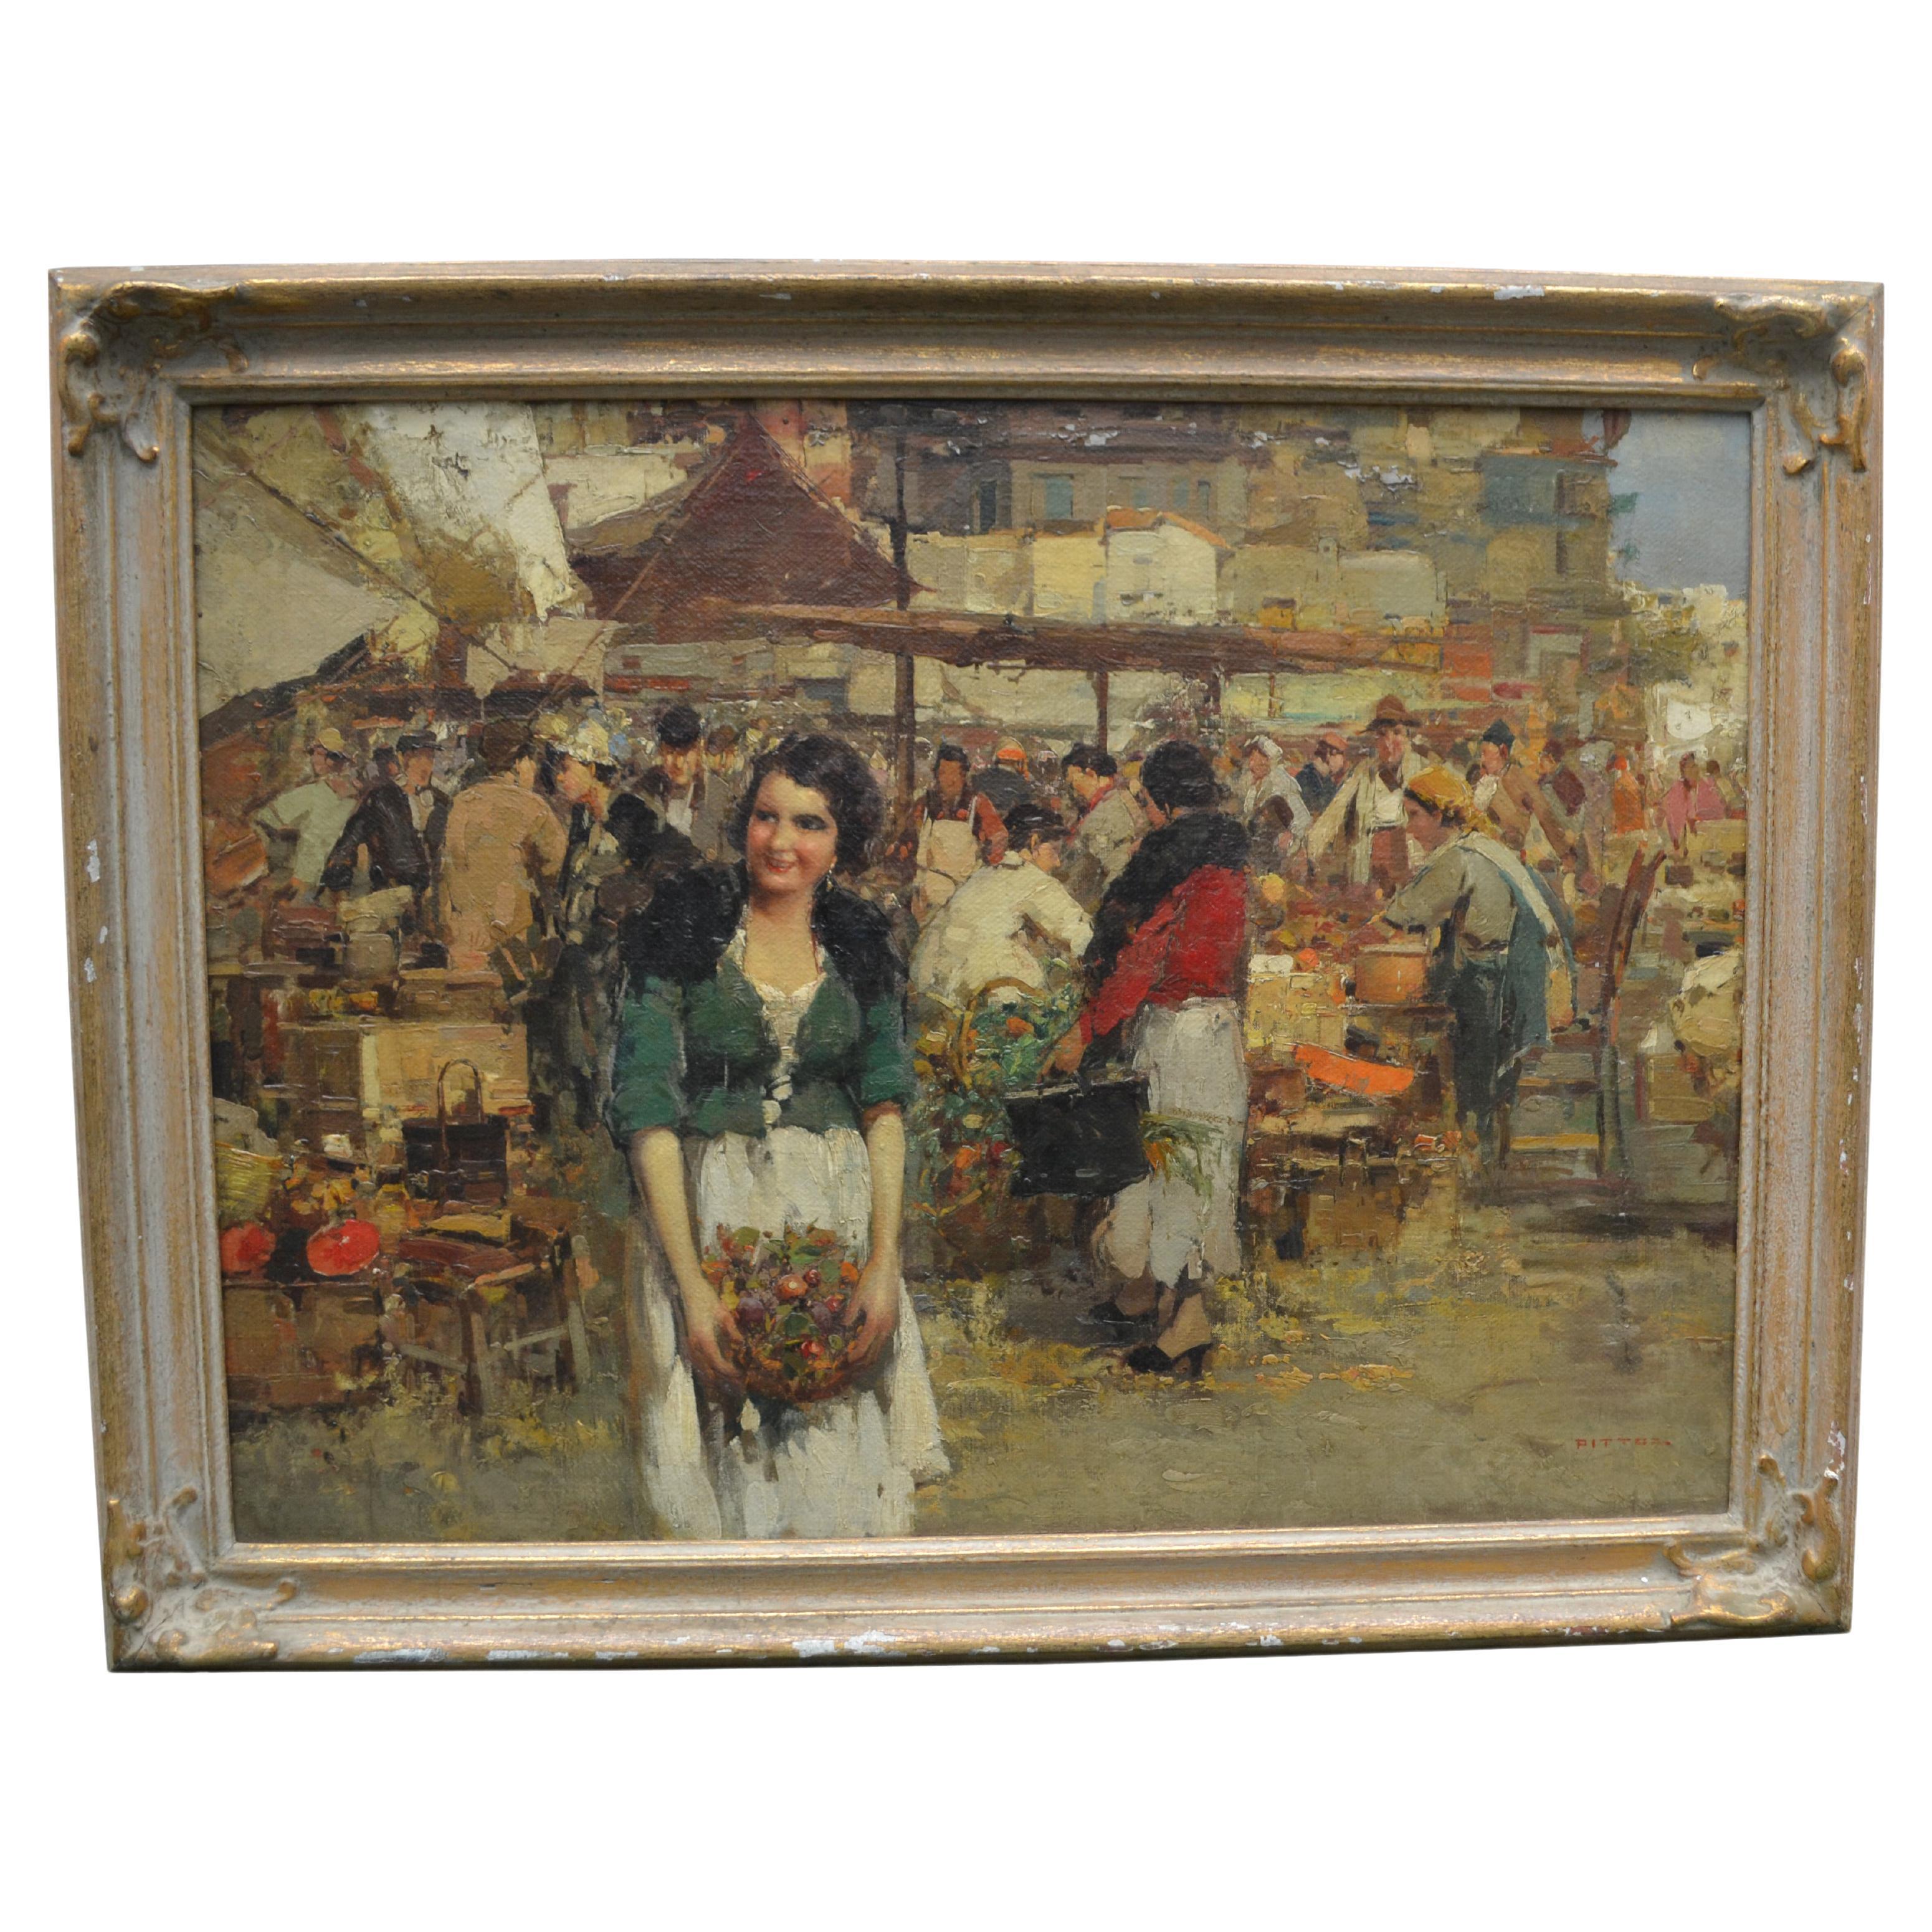 Early 19 Century Italian Painting Titled "in the Market" by Giacomo Pittoz